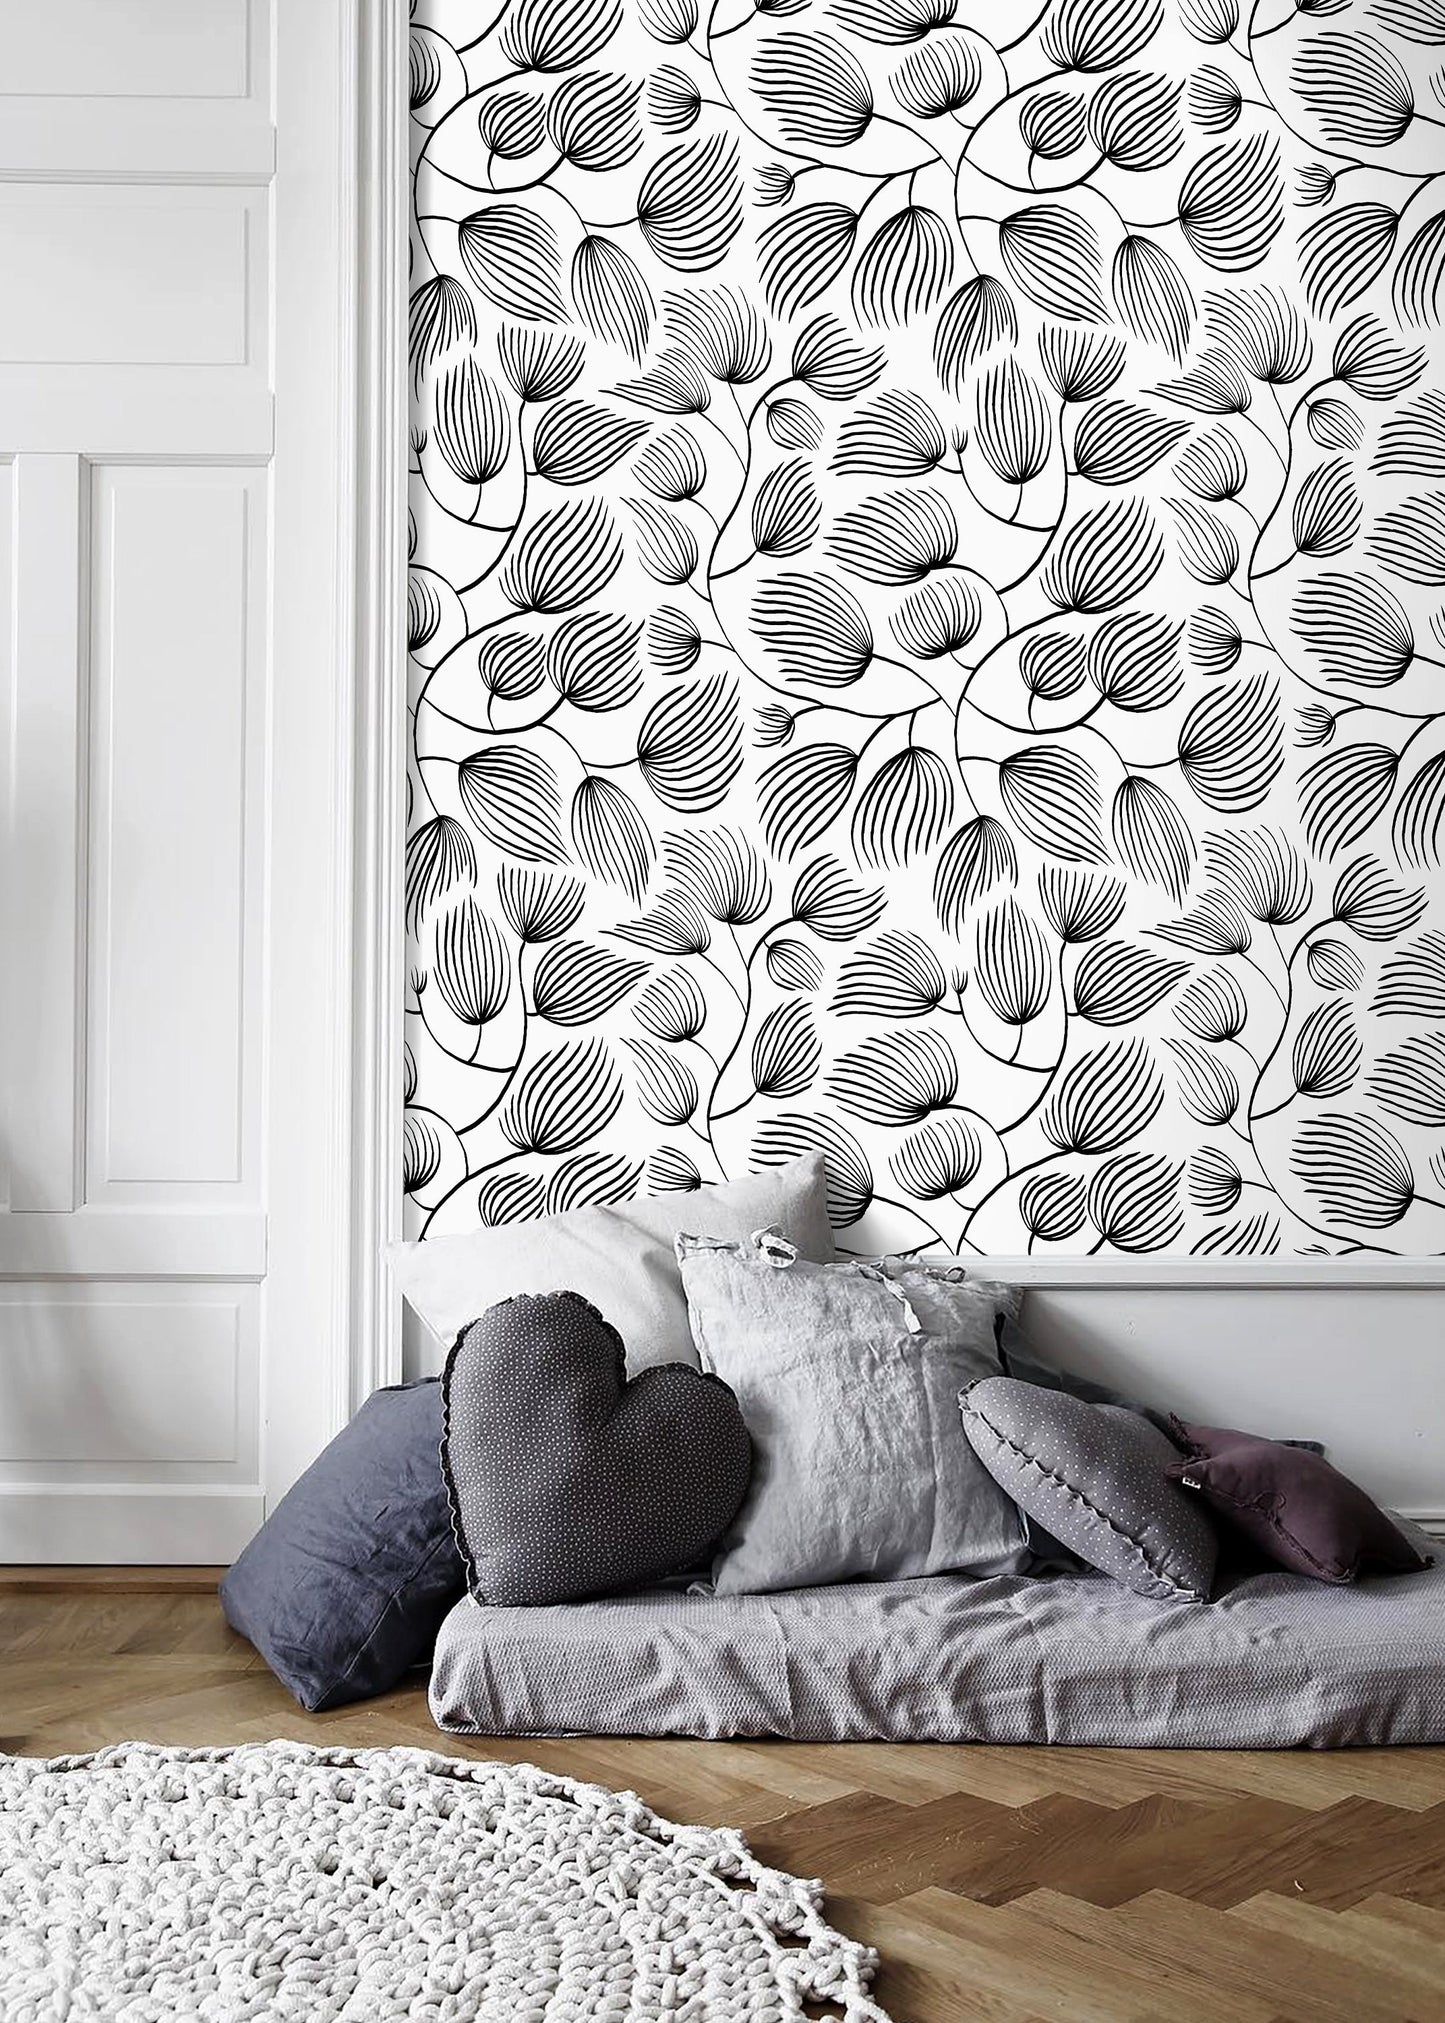 Black and White Leaves Wallpaper / Peel and Stick Wallpaper Removable Wallpaper Home Decor Wall Art Wall Decor Room Decor - C680